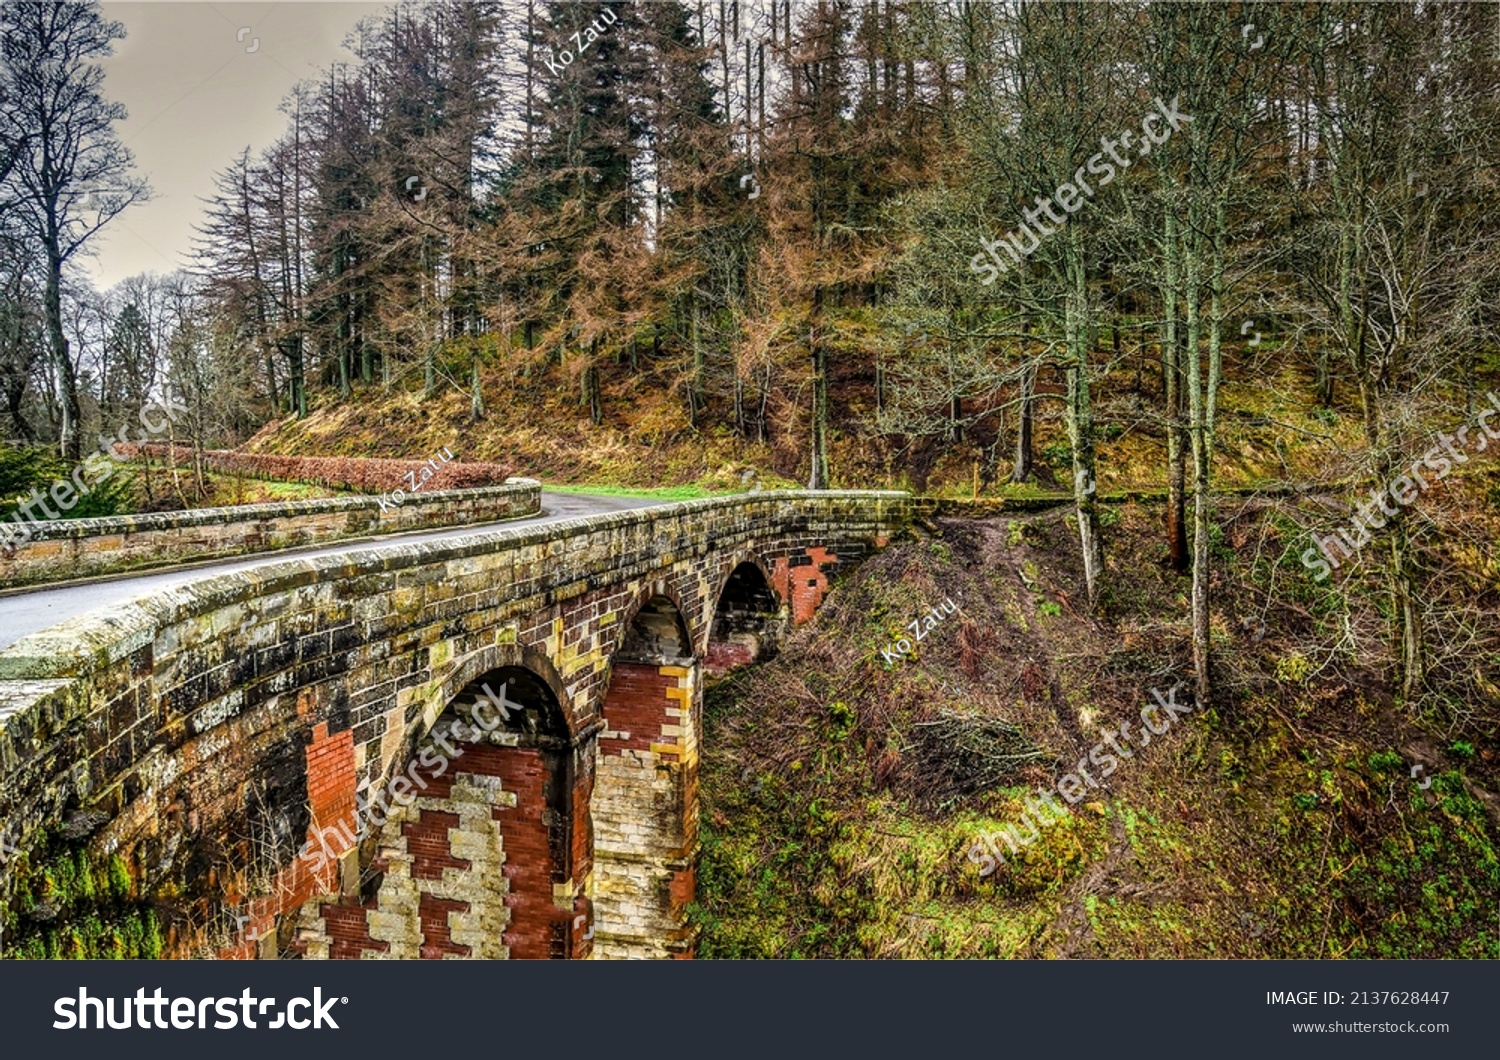 The old bridge in the mountain forests. Bridge in forest #2137628447